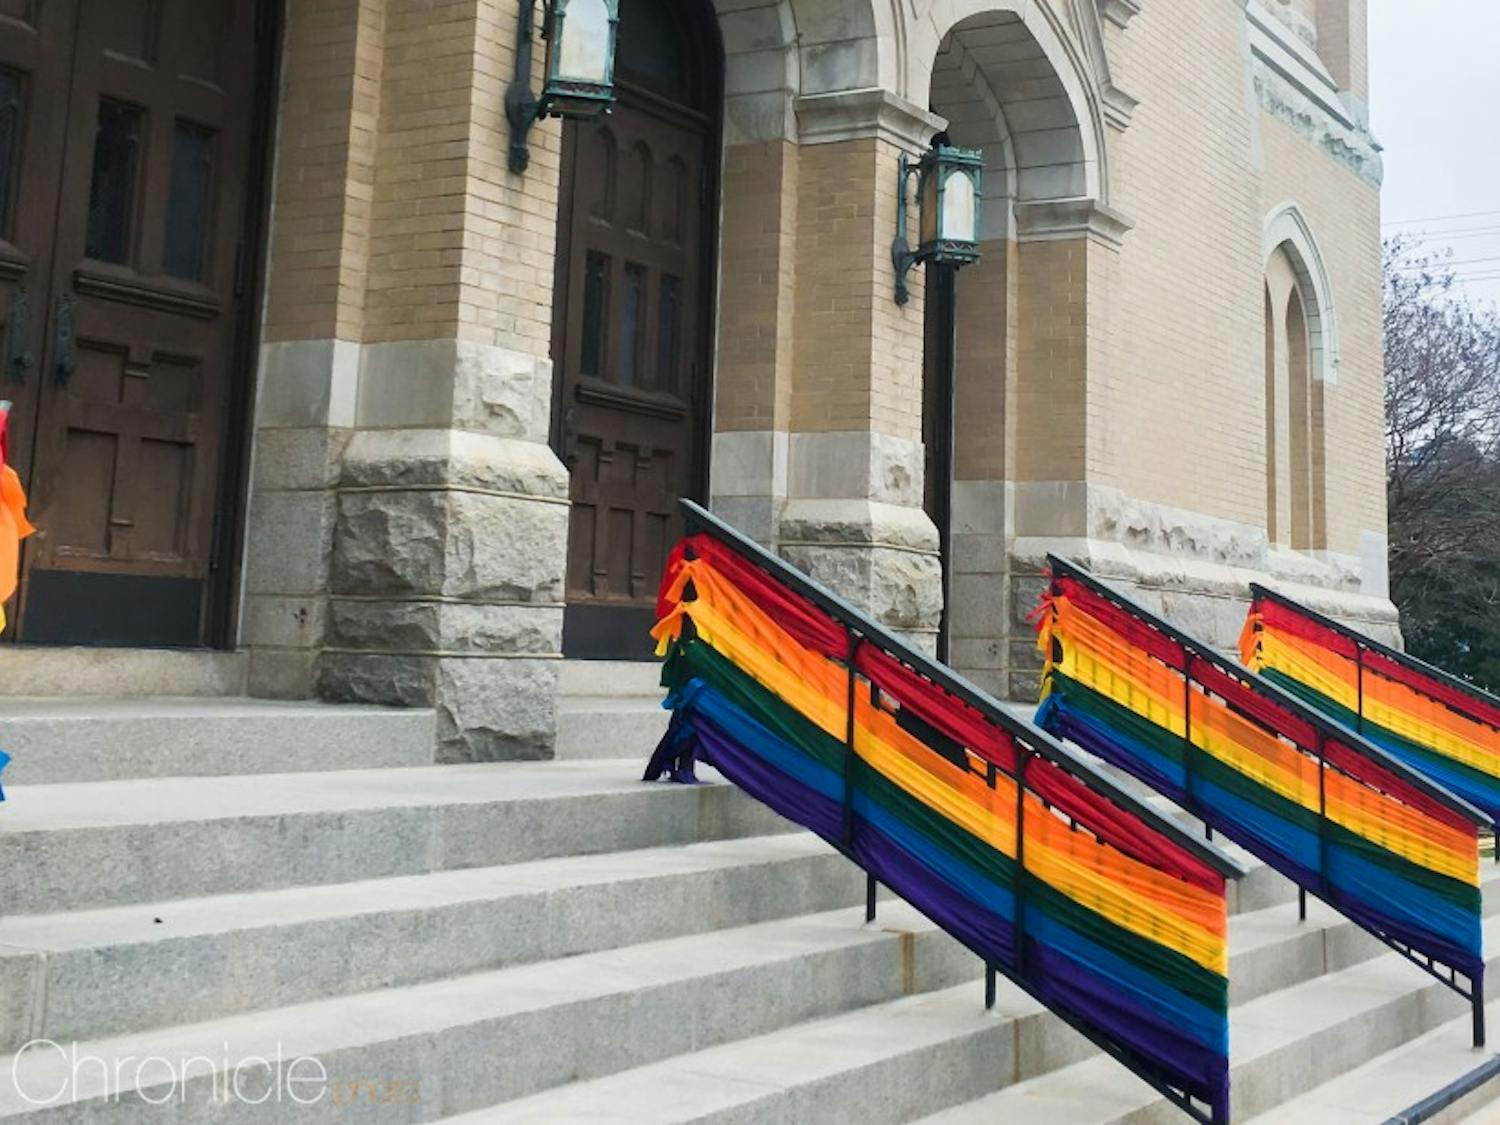 The United Methodist Church voted in February to prohibit same-sex marriages in their churches.